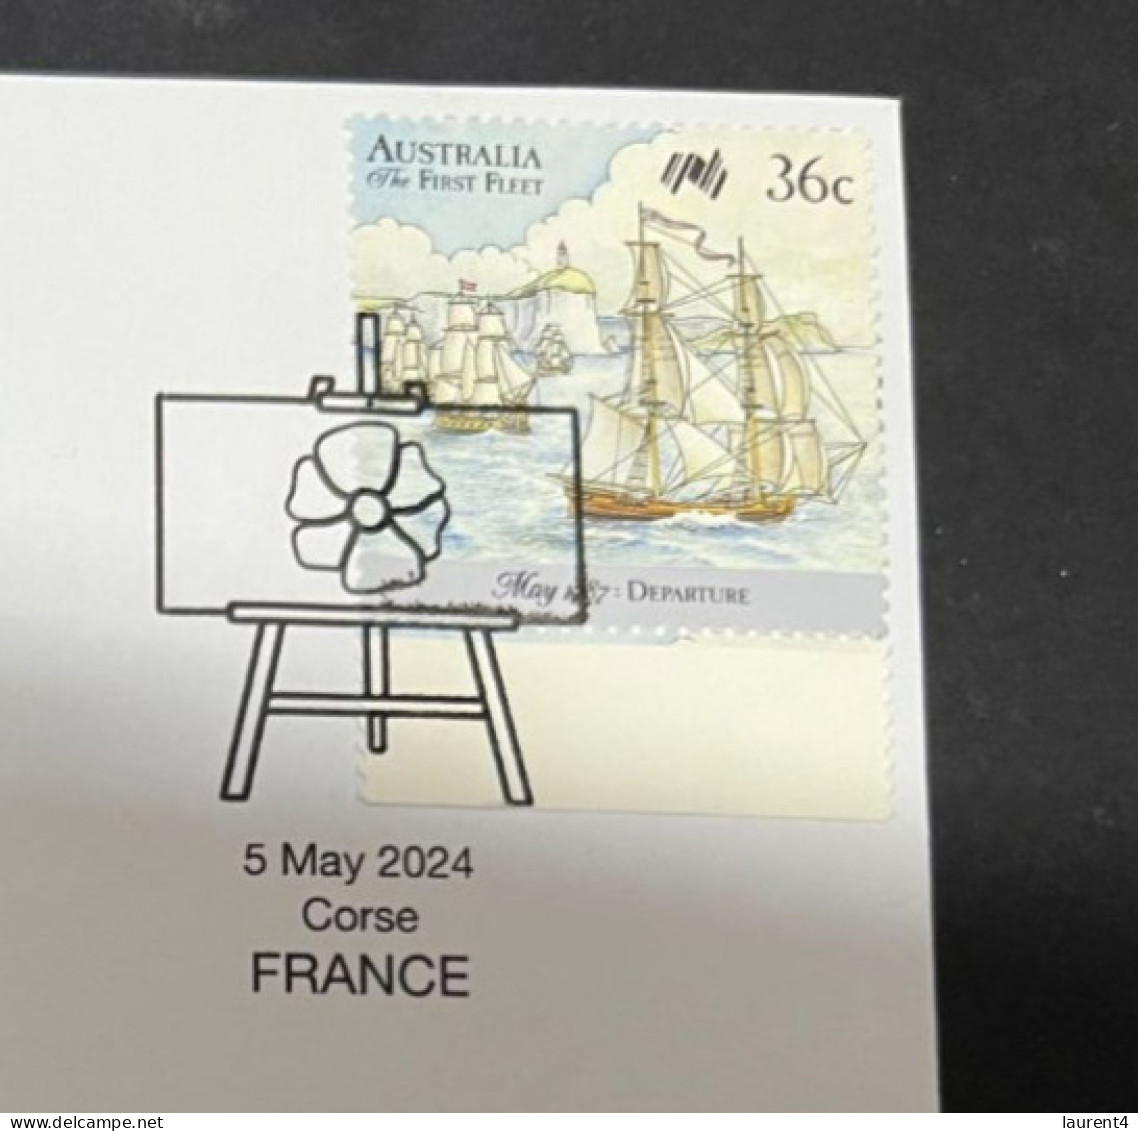 19-5-2024 (5 Z 32) Paris Olympic Games 2024 - The Olympic Flame Travel On Sail Ship BELEM (1 Cover) - Sommer 2024: Paris